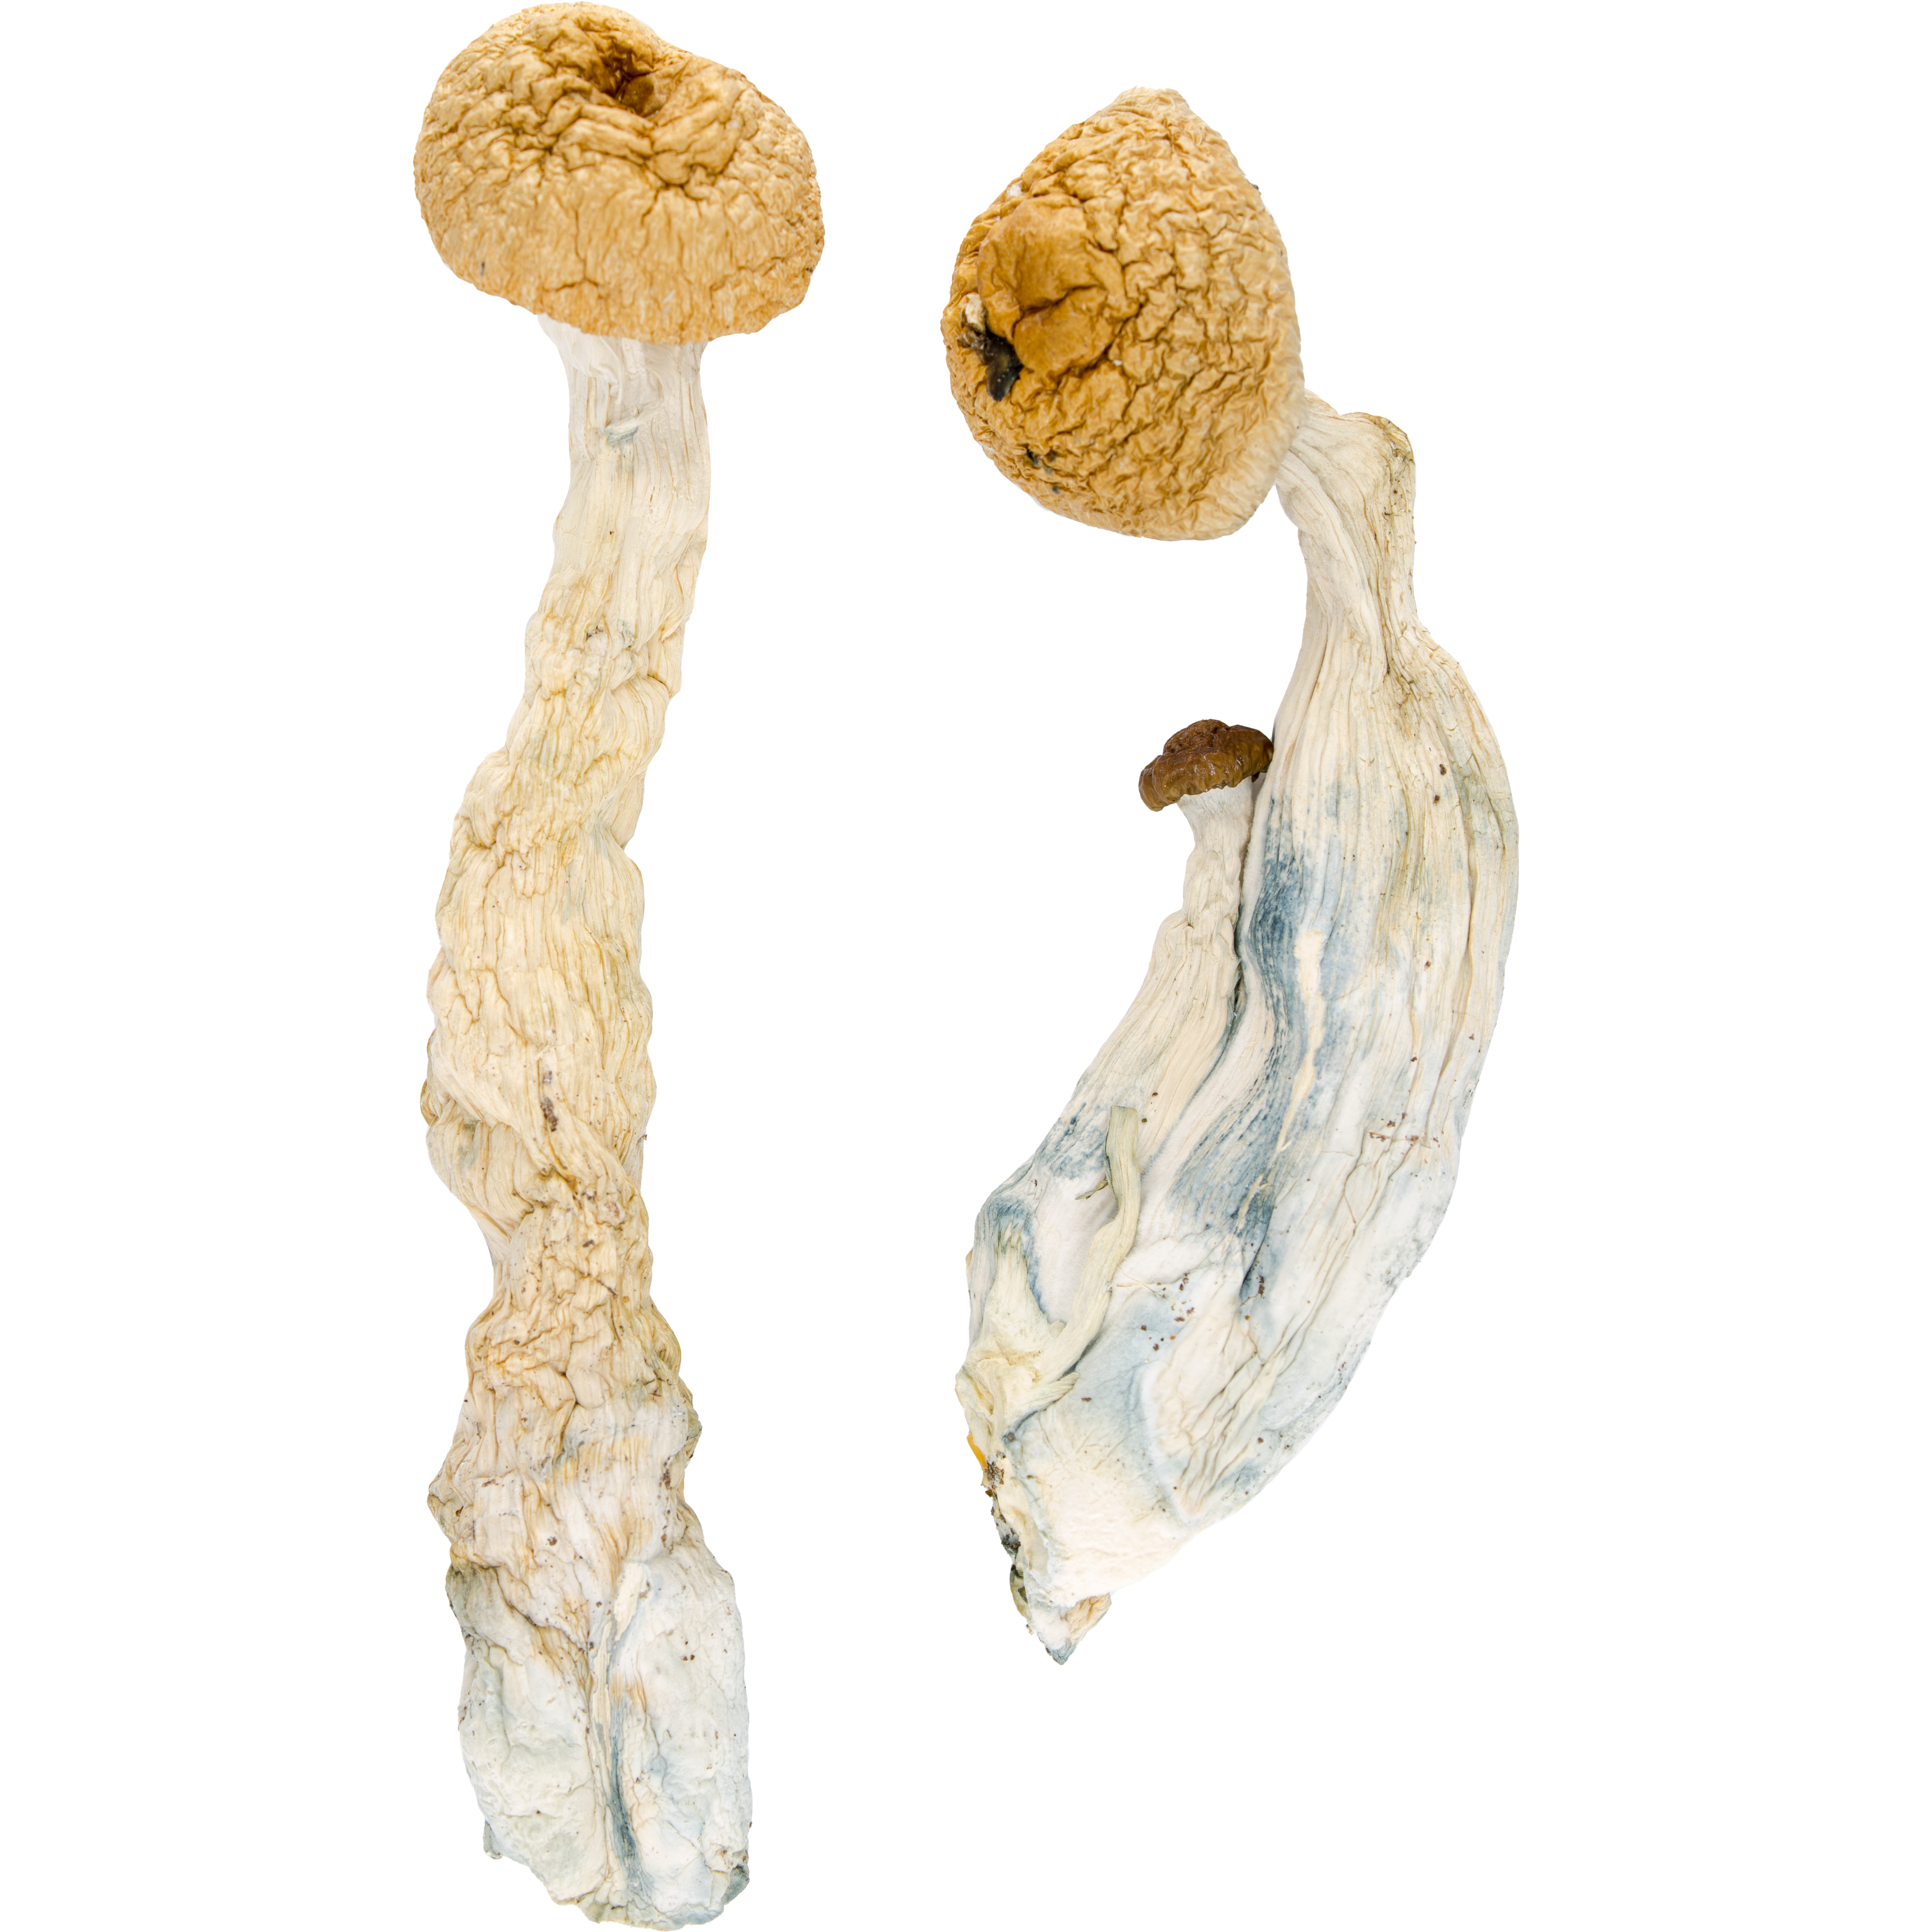 Buy Tidal Wave Mushrooms Products at Zoomies Canada. This strain causes heavy visual hallucinations with intense euphoria and mental clarity.